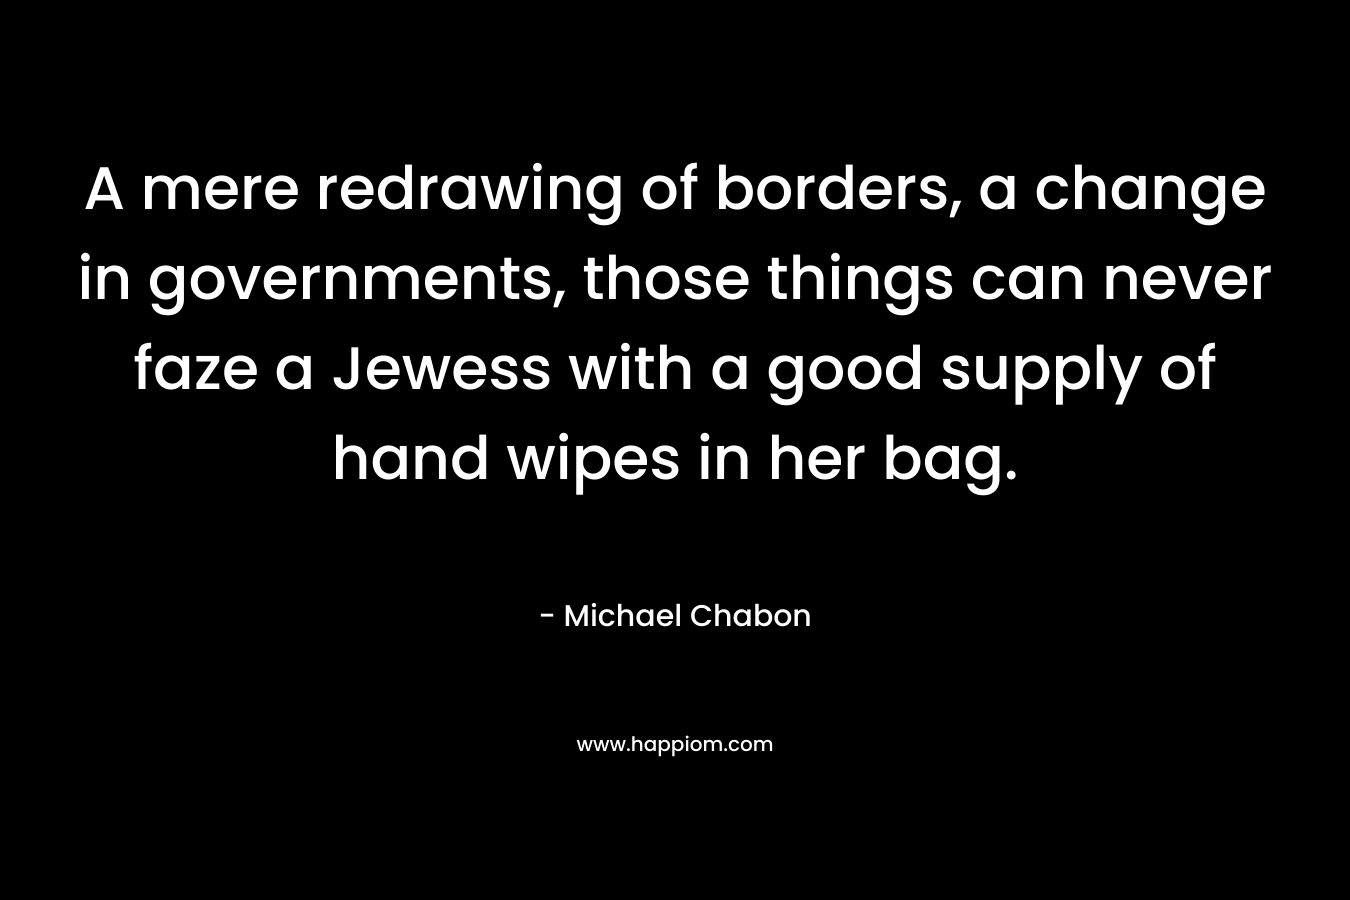 A mere redrawing of borders, a change in governments, those things can never faze a Jewess with a good supply of hand wipes in her bag. – Michael Chabon